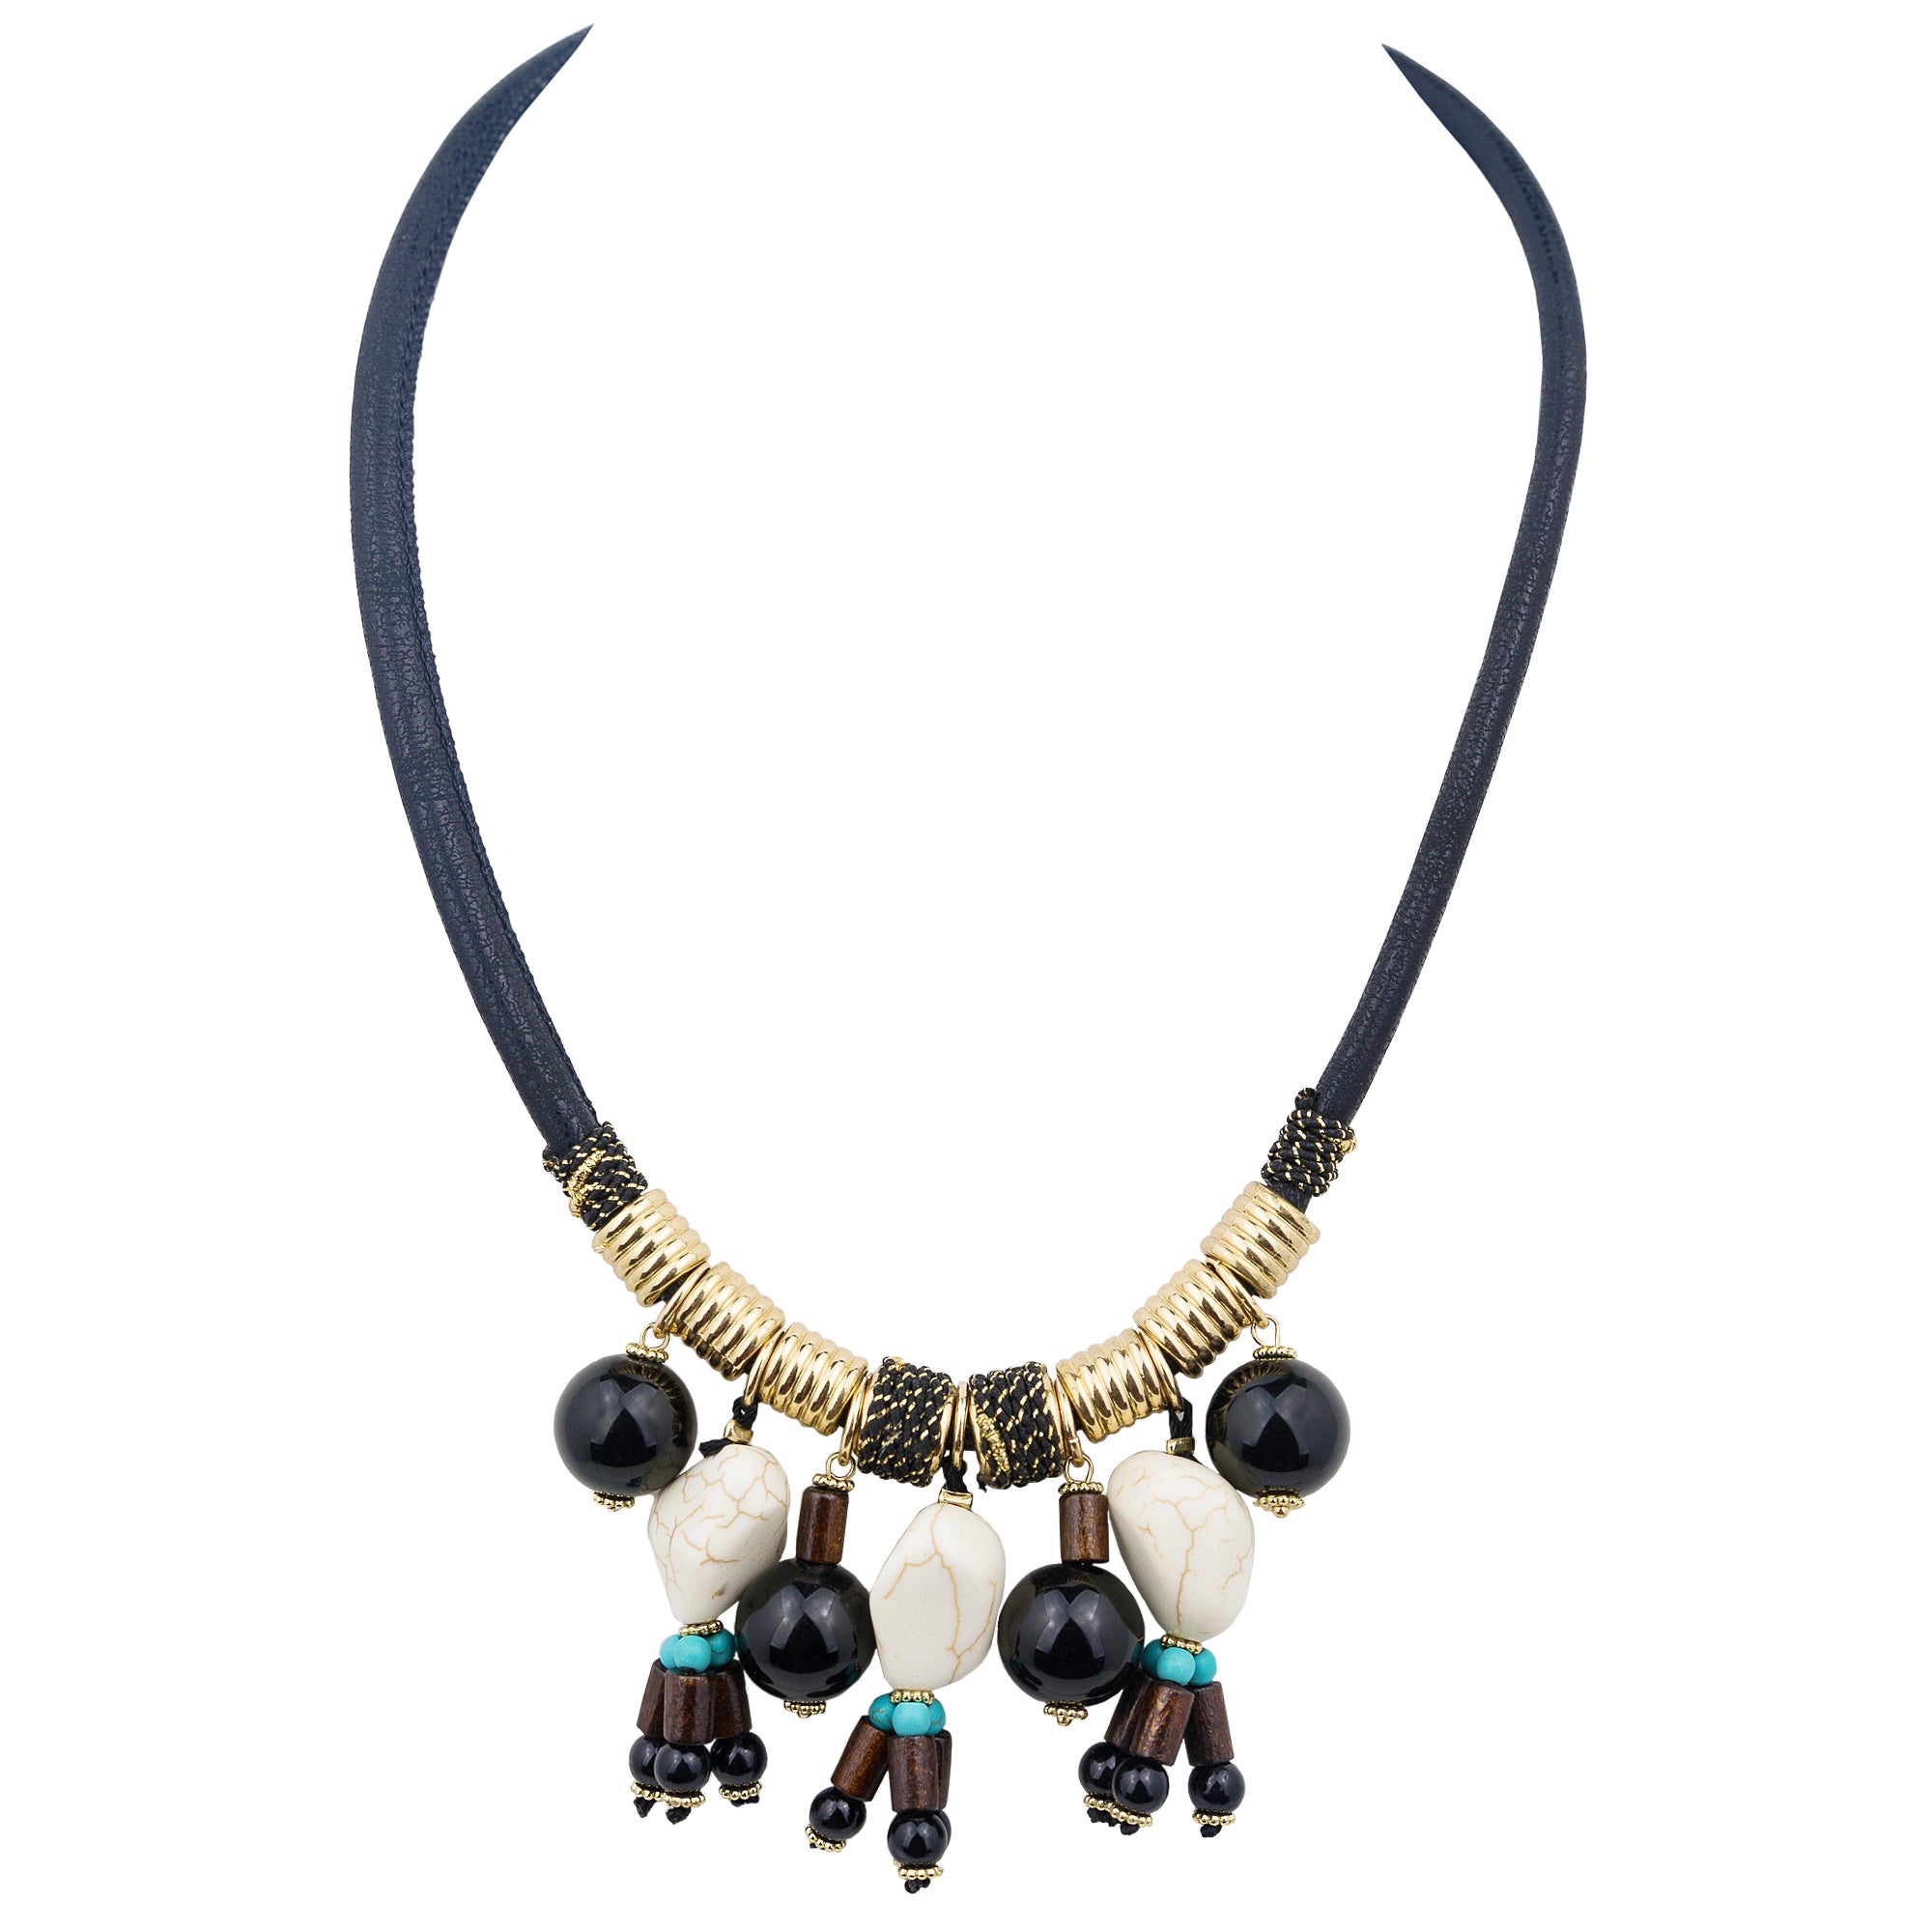 Genuine River Washed Stones Necklace, Turquoise, Wood, Beads & Skin Leather Thong, Santa Fe S048-05